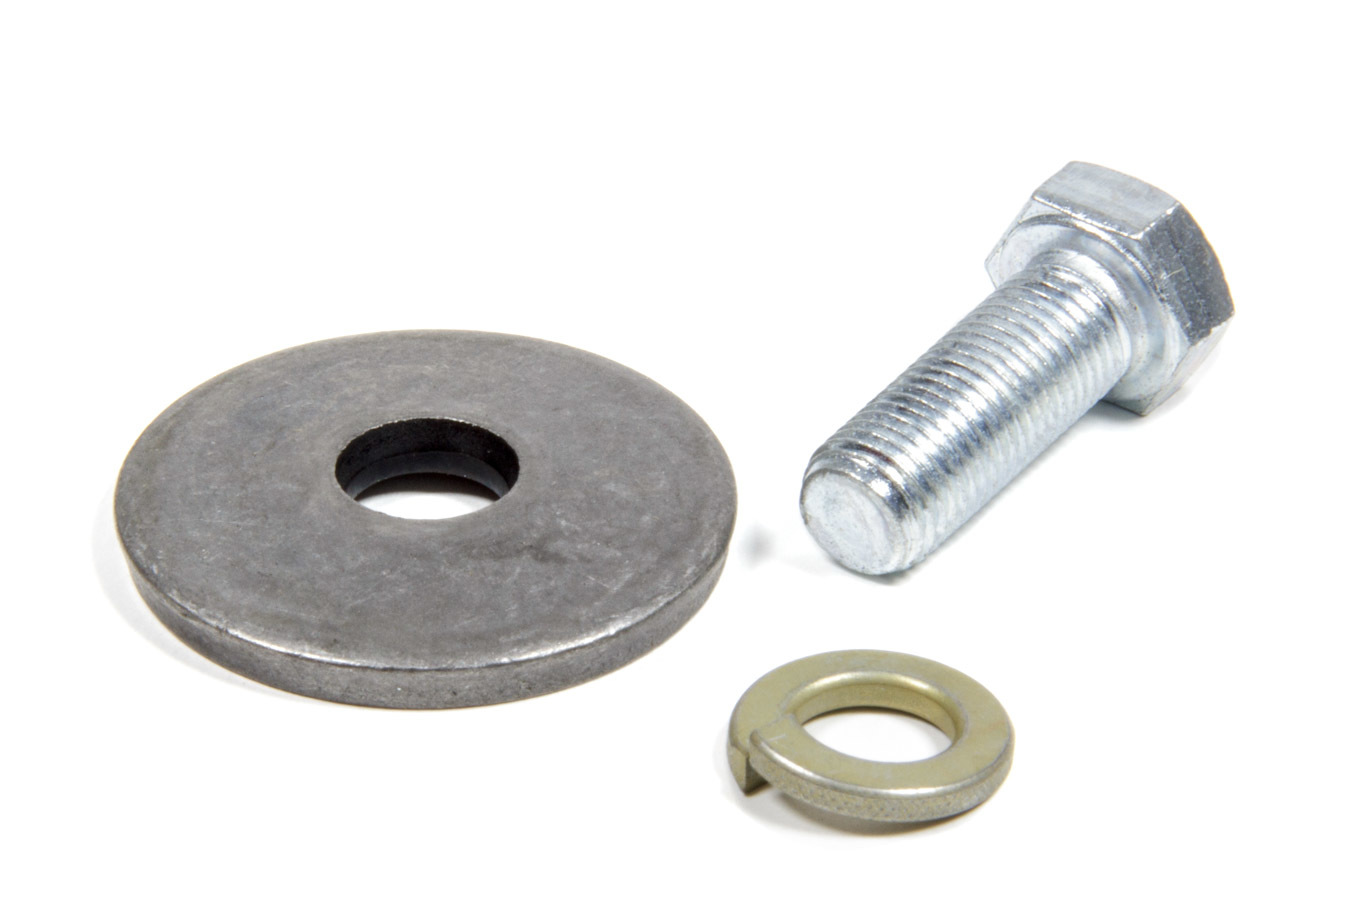 Yoke Bolt and Washer - RV Parts Express - Specialty RV Parts Retailer